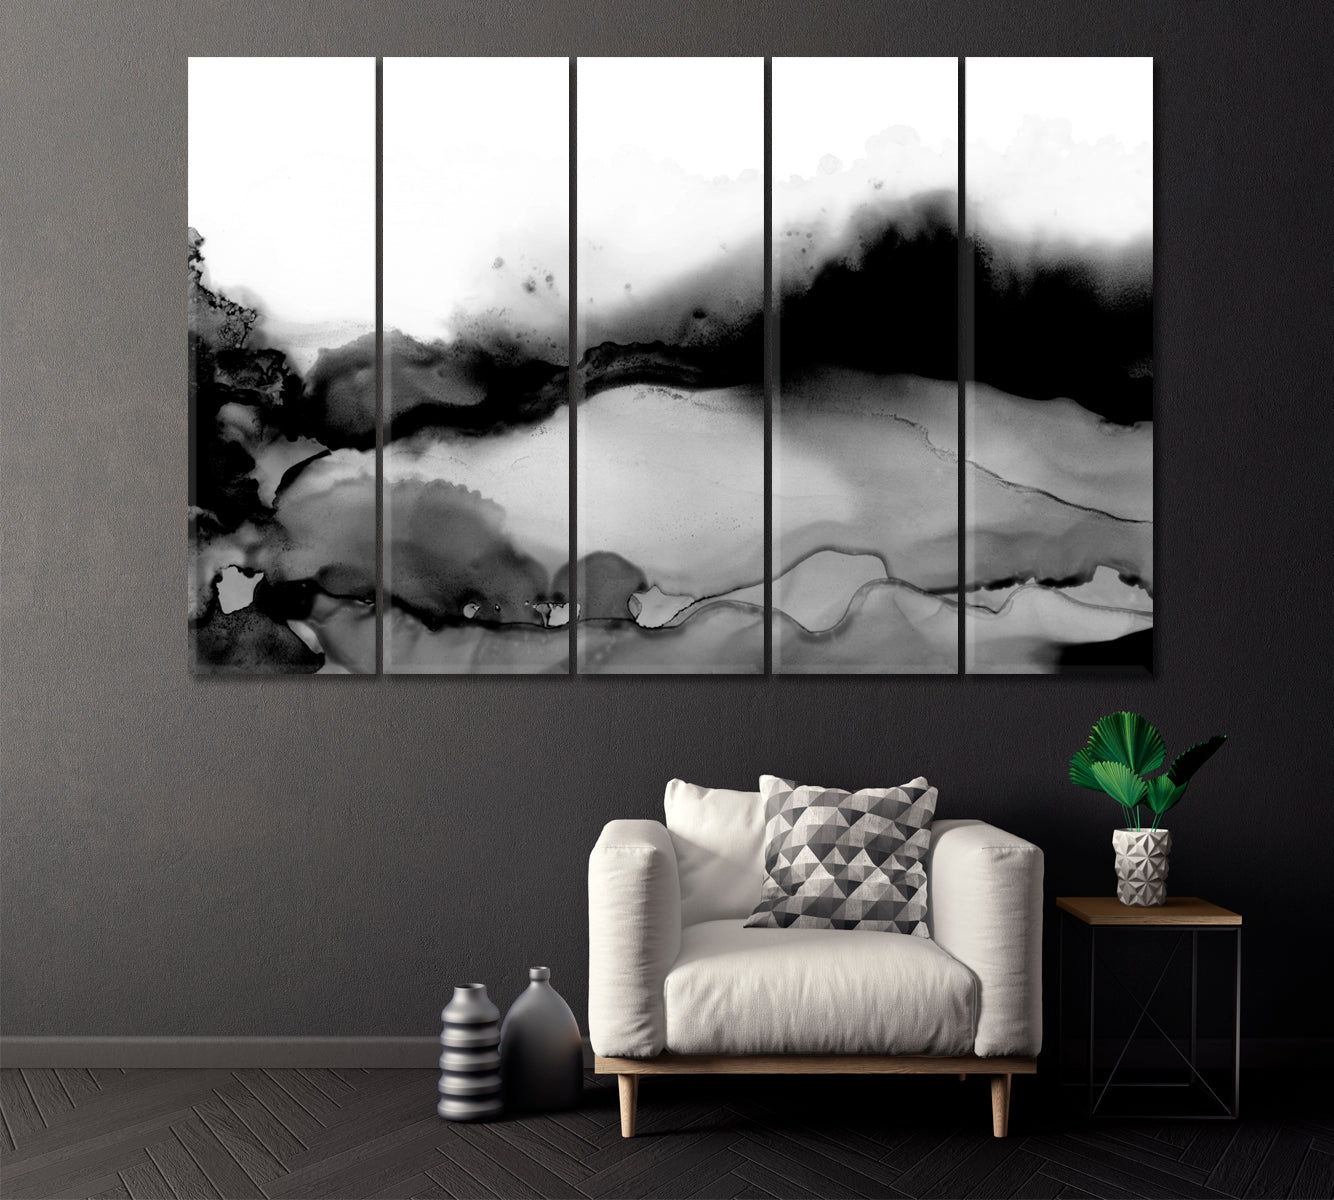 Abstract Black and White Canvas Print ArtLexy 5 Panels 36"x24" inches 